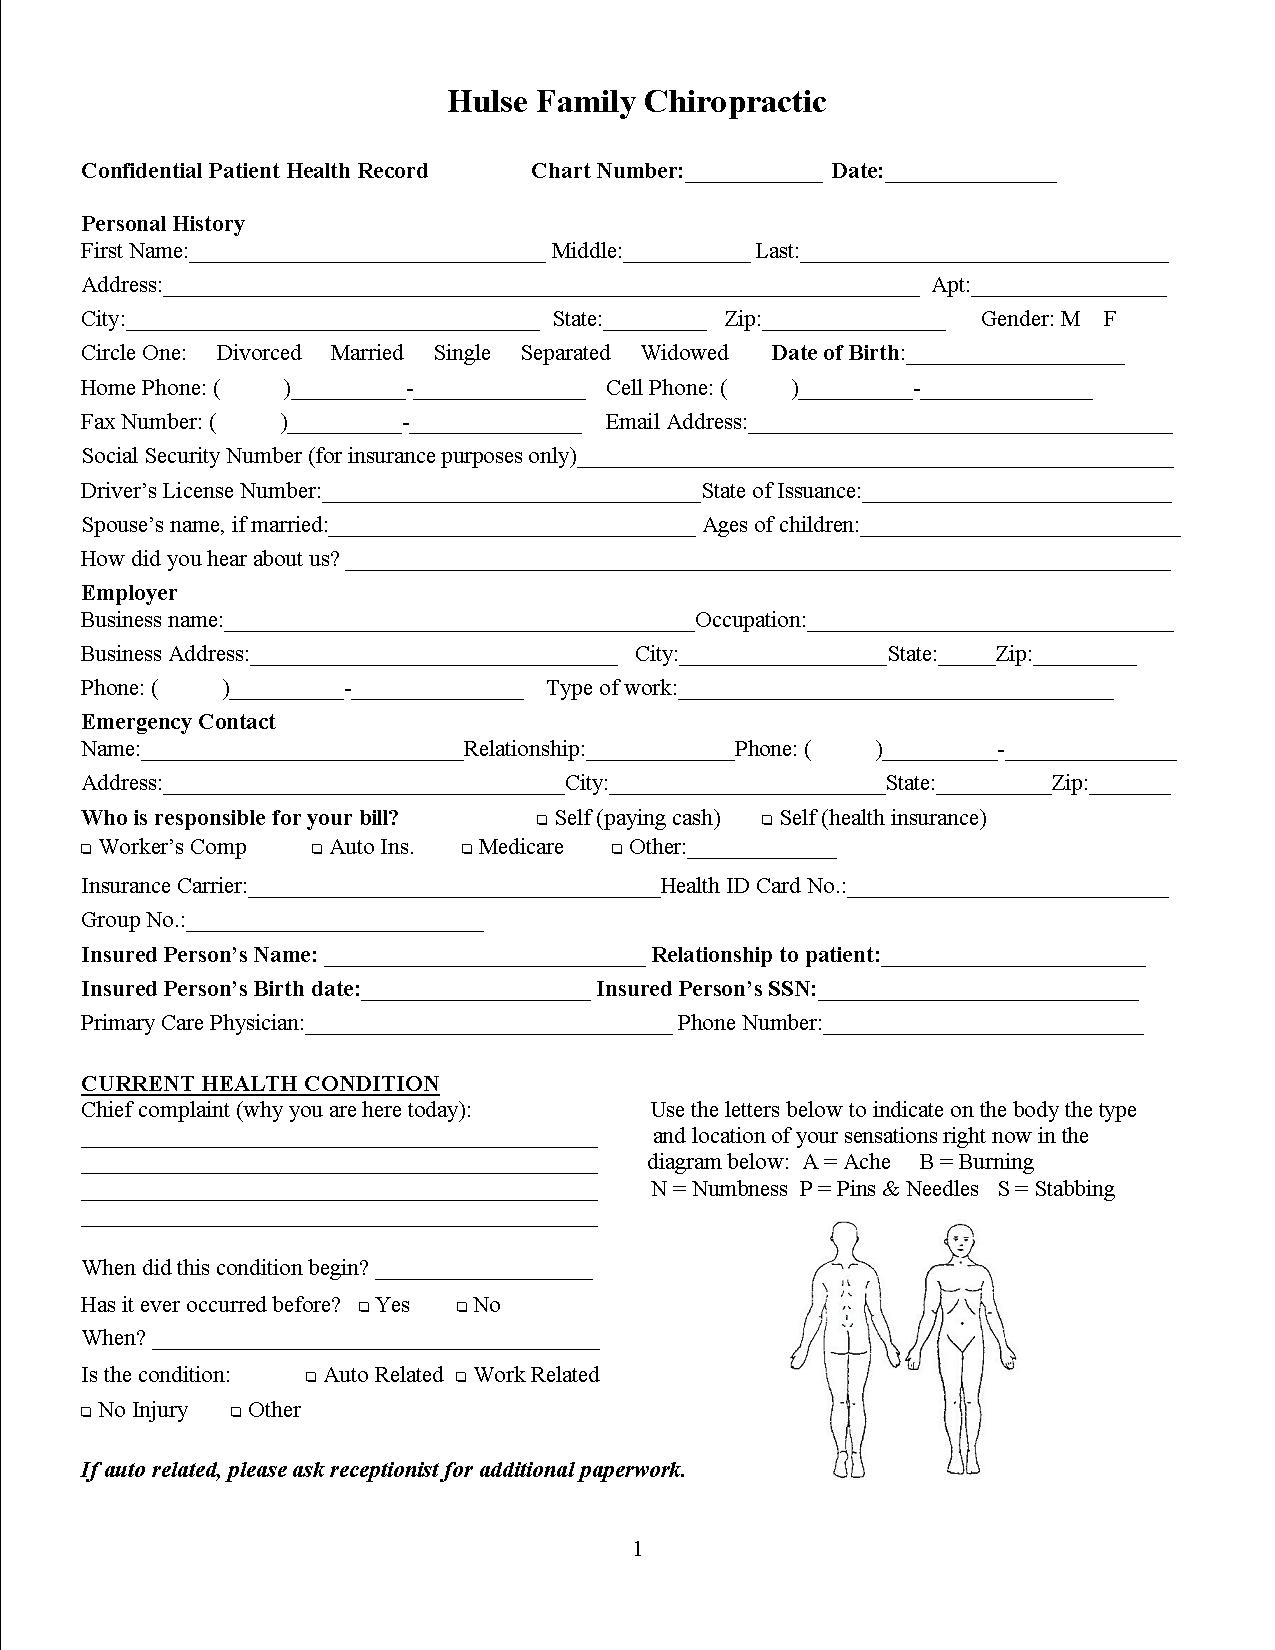 5 Best Images Of Printable Chiropractic Forms Chiropractic New 